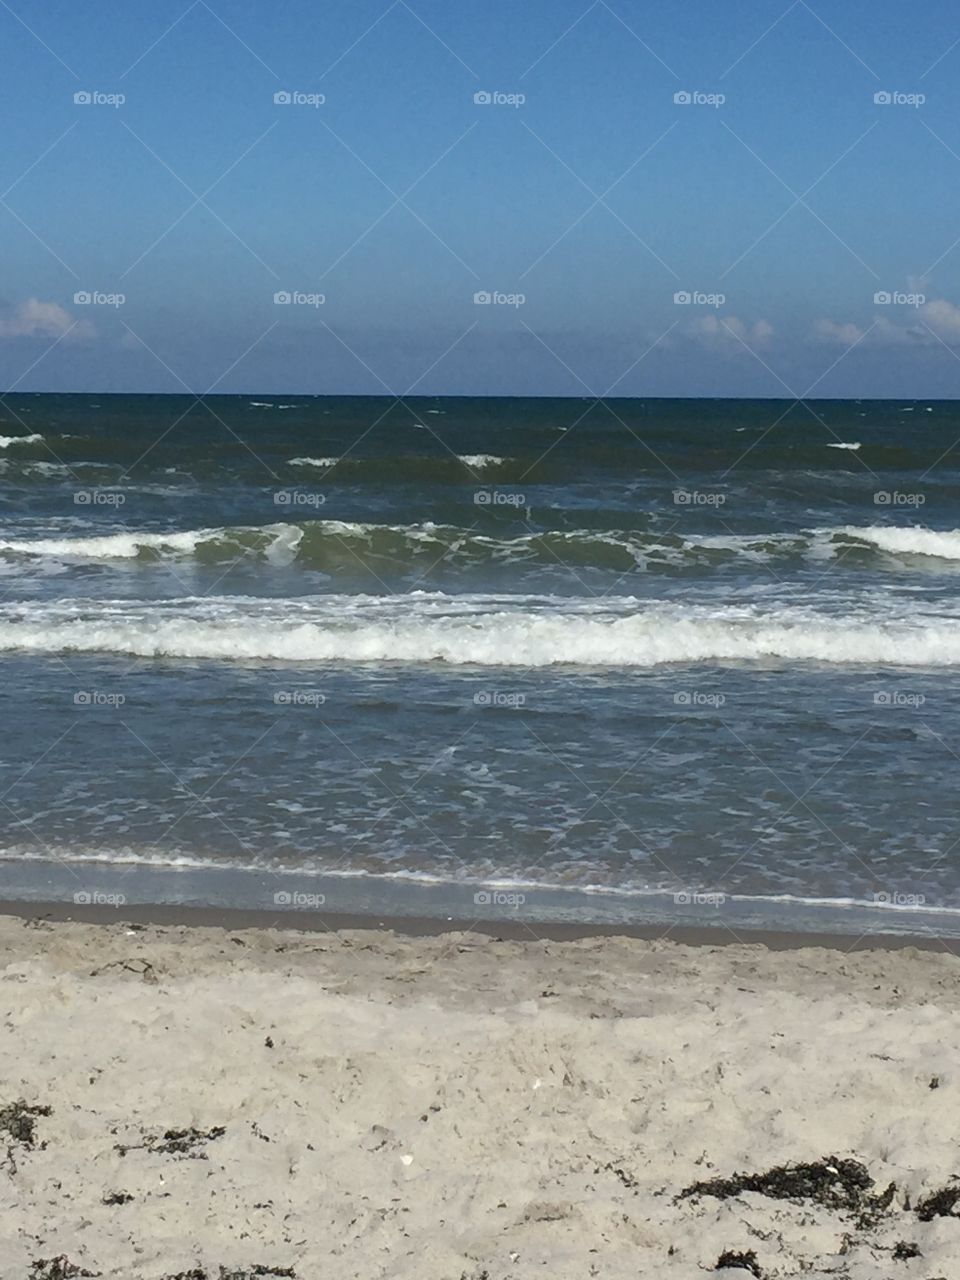 Wave watching at the beach